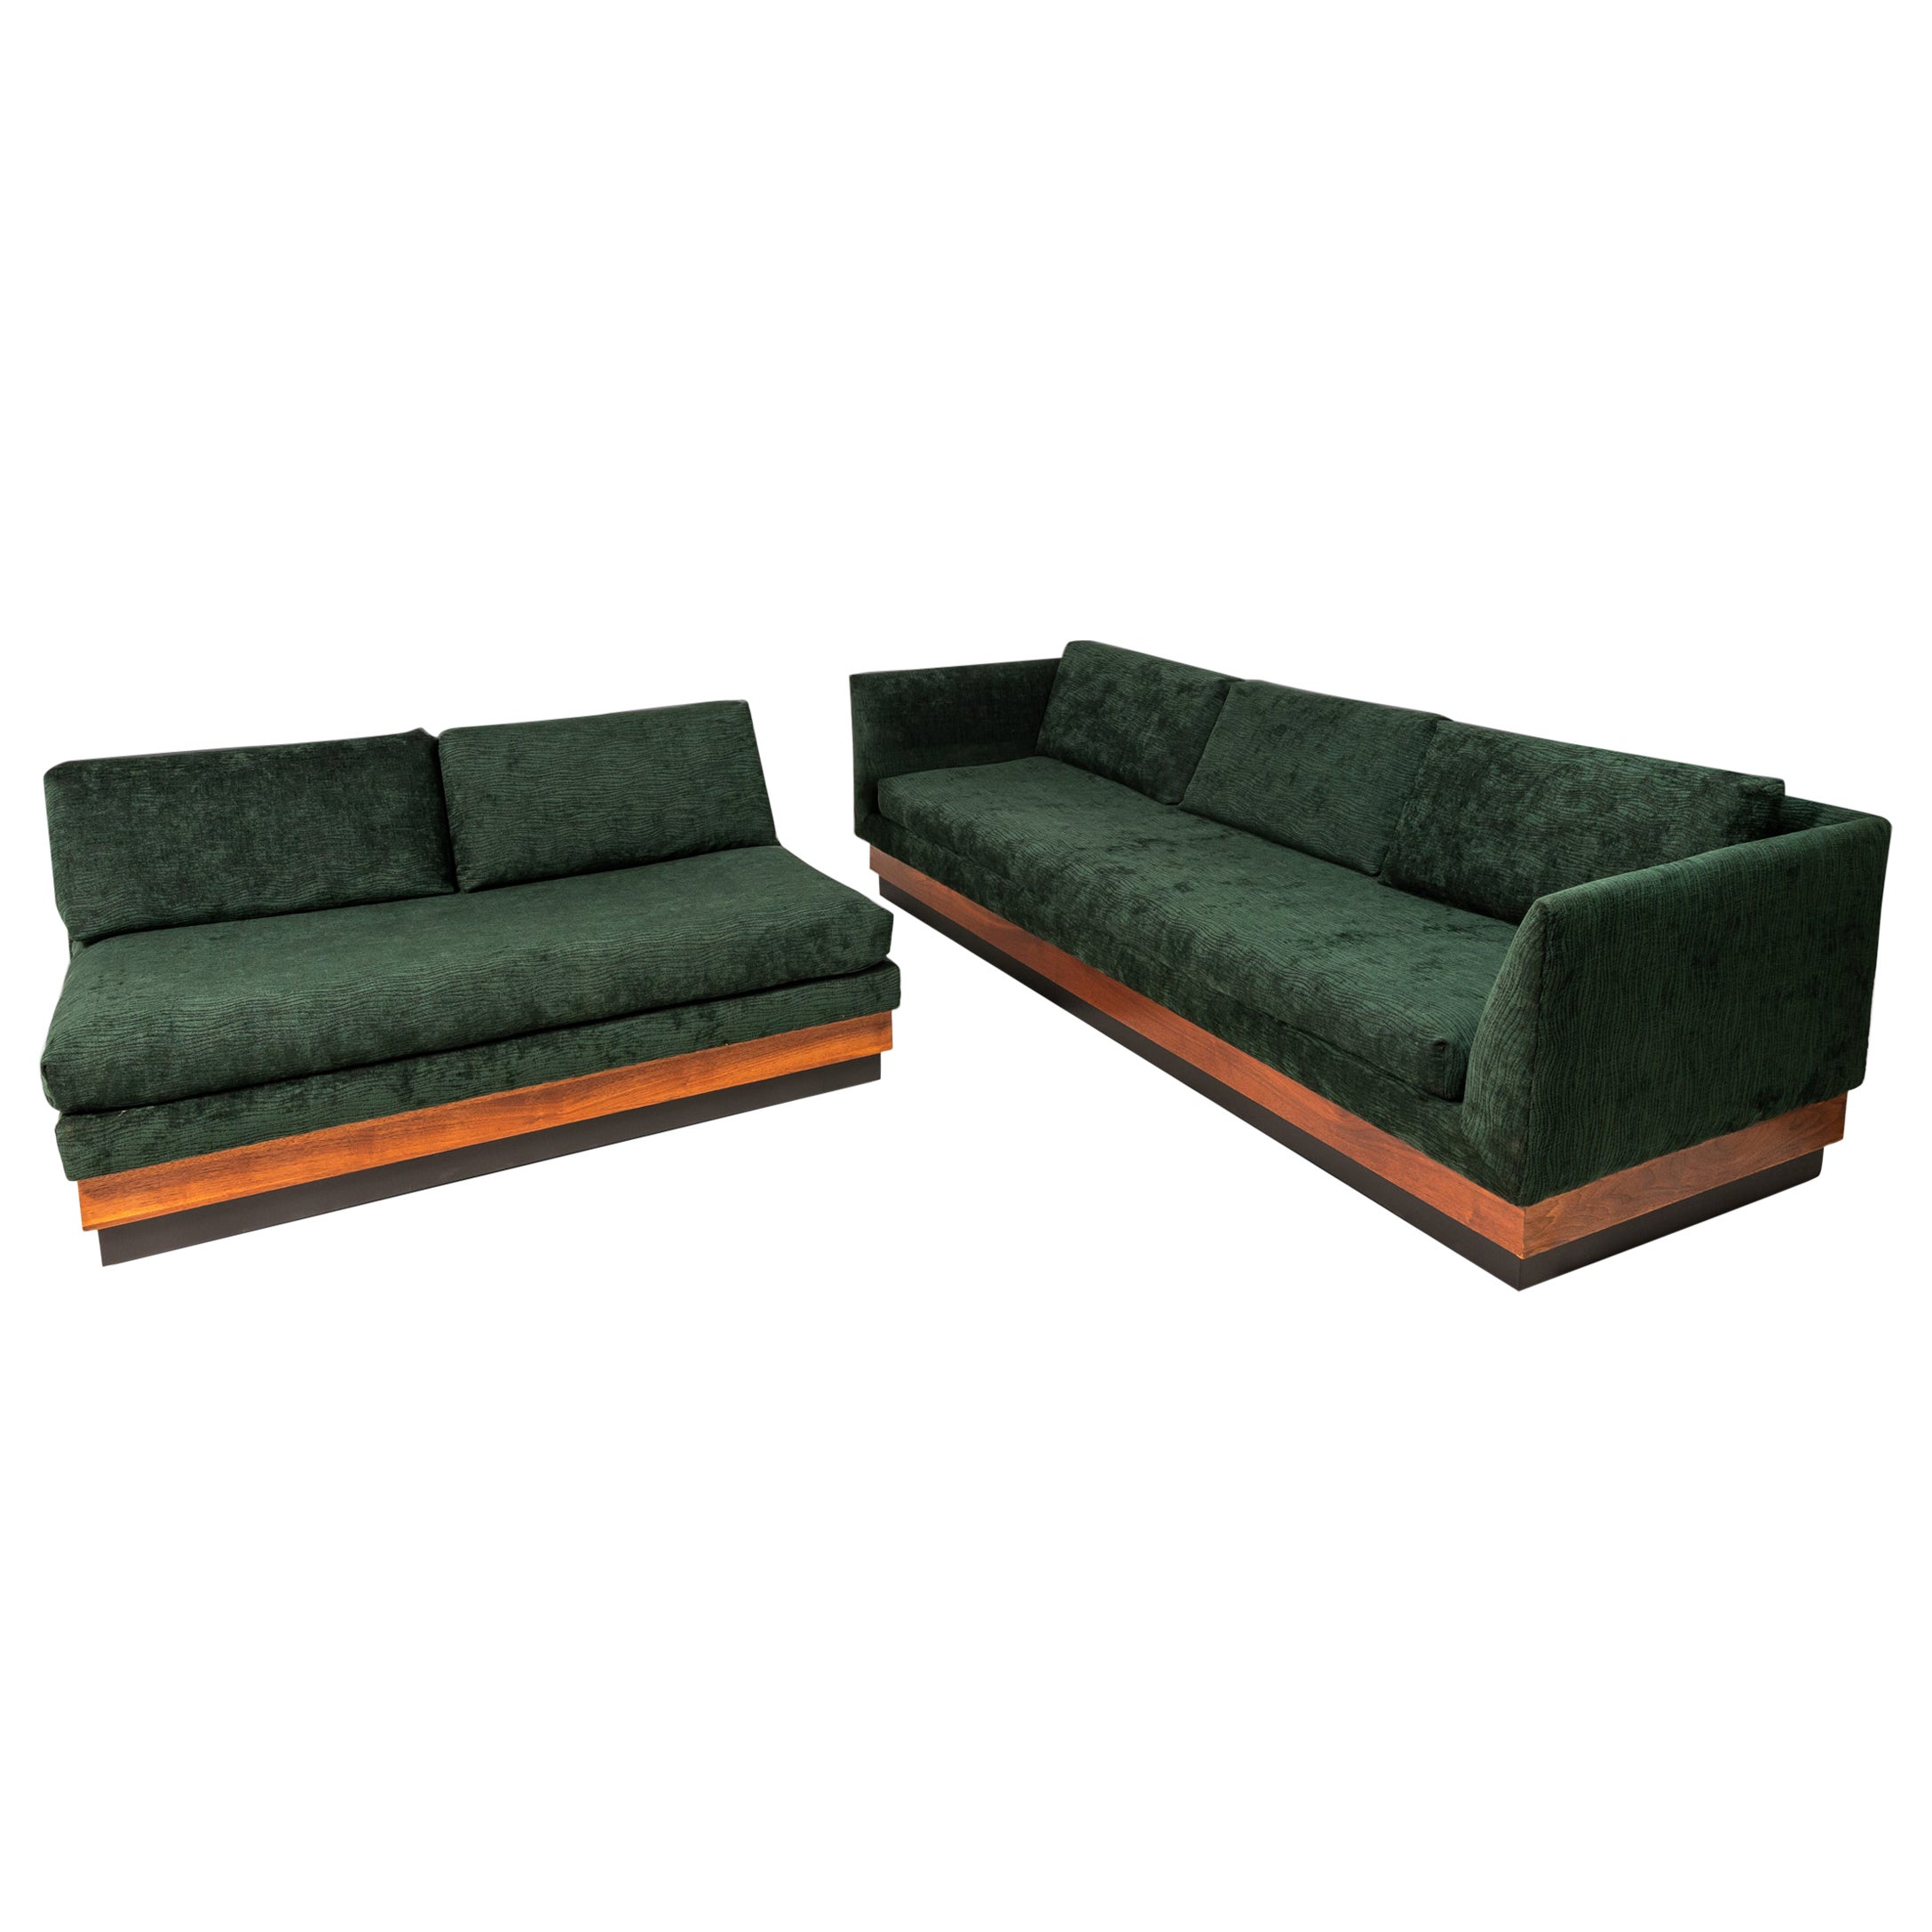  Deadstock Fabric Platform Sofa Set by Adrian Pearsall for Craft Associates, 60s For Sale